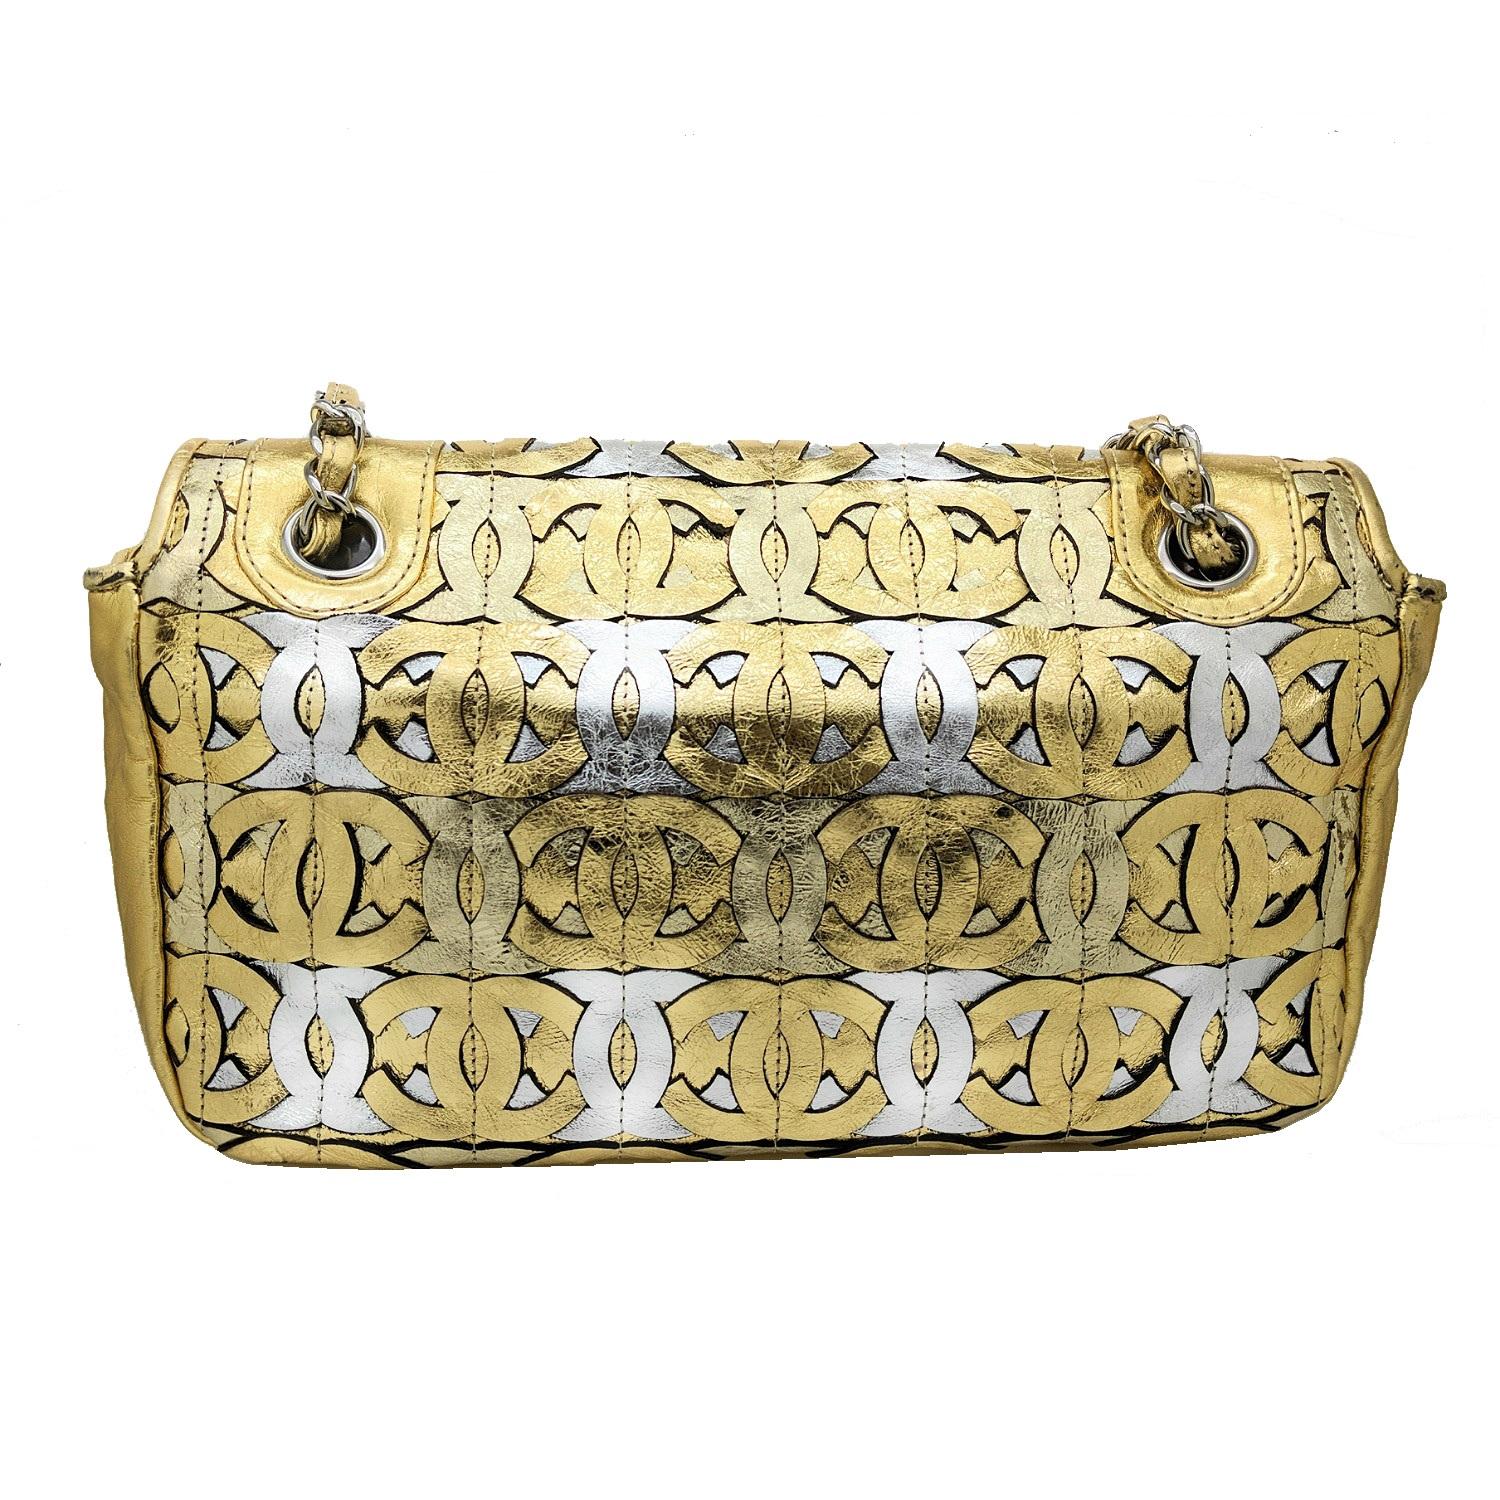 This stunning shoulder flap bag is crafted of a pattern of collaged gold and silver calfskin crackled leather Chanel CC logos. The bag features silver chain link leather threaded shoulder straps and a border trim of gold leather with a CC magnetic